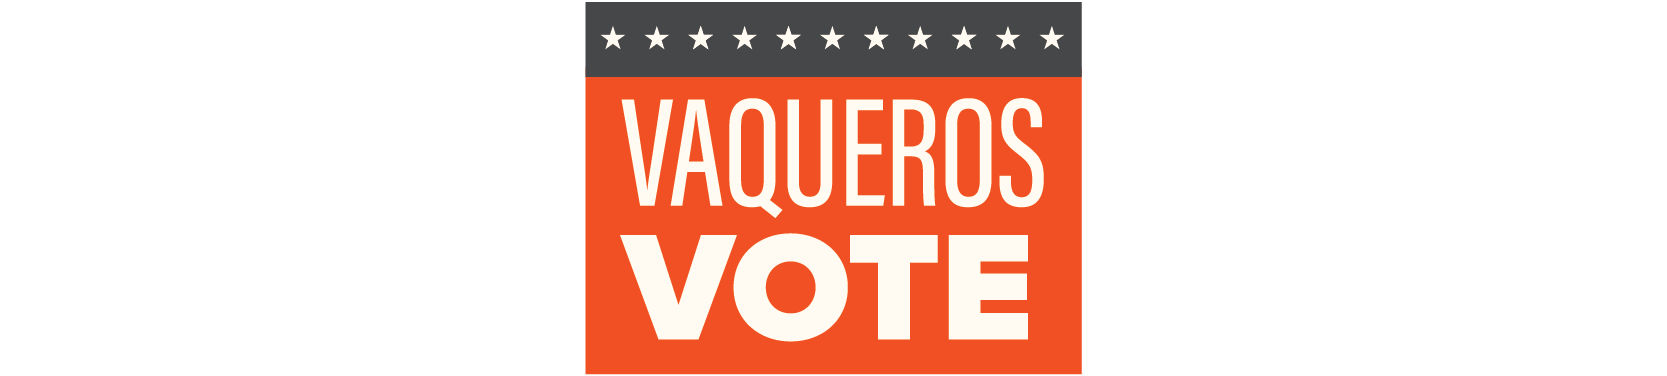 Vaqueros Vote has partnered with TurboVote to make it easier for the UTRGV community